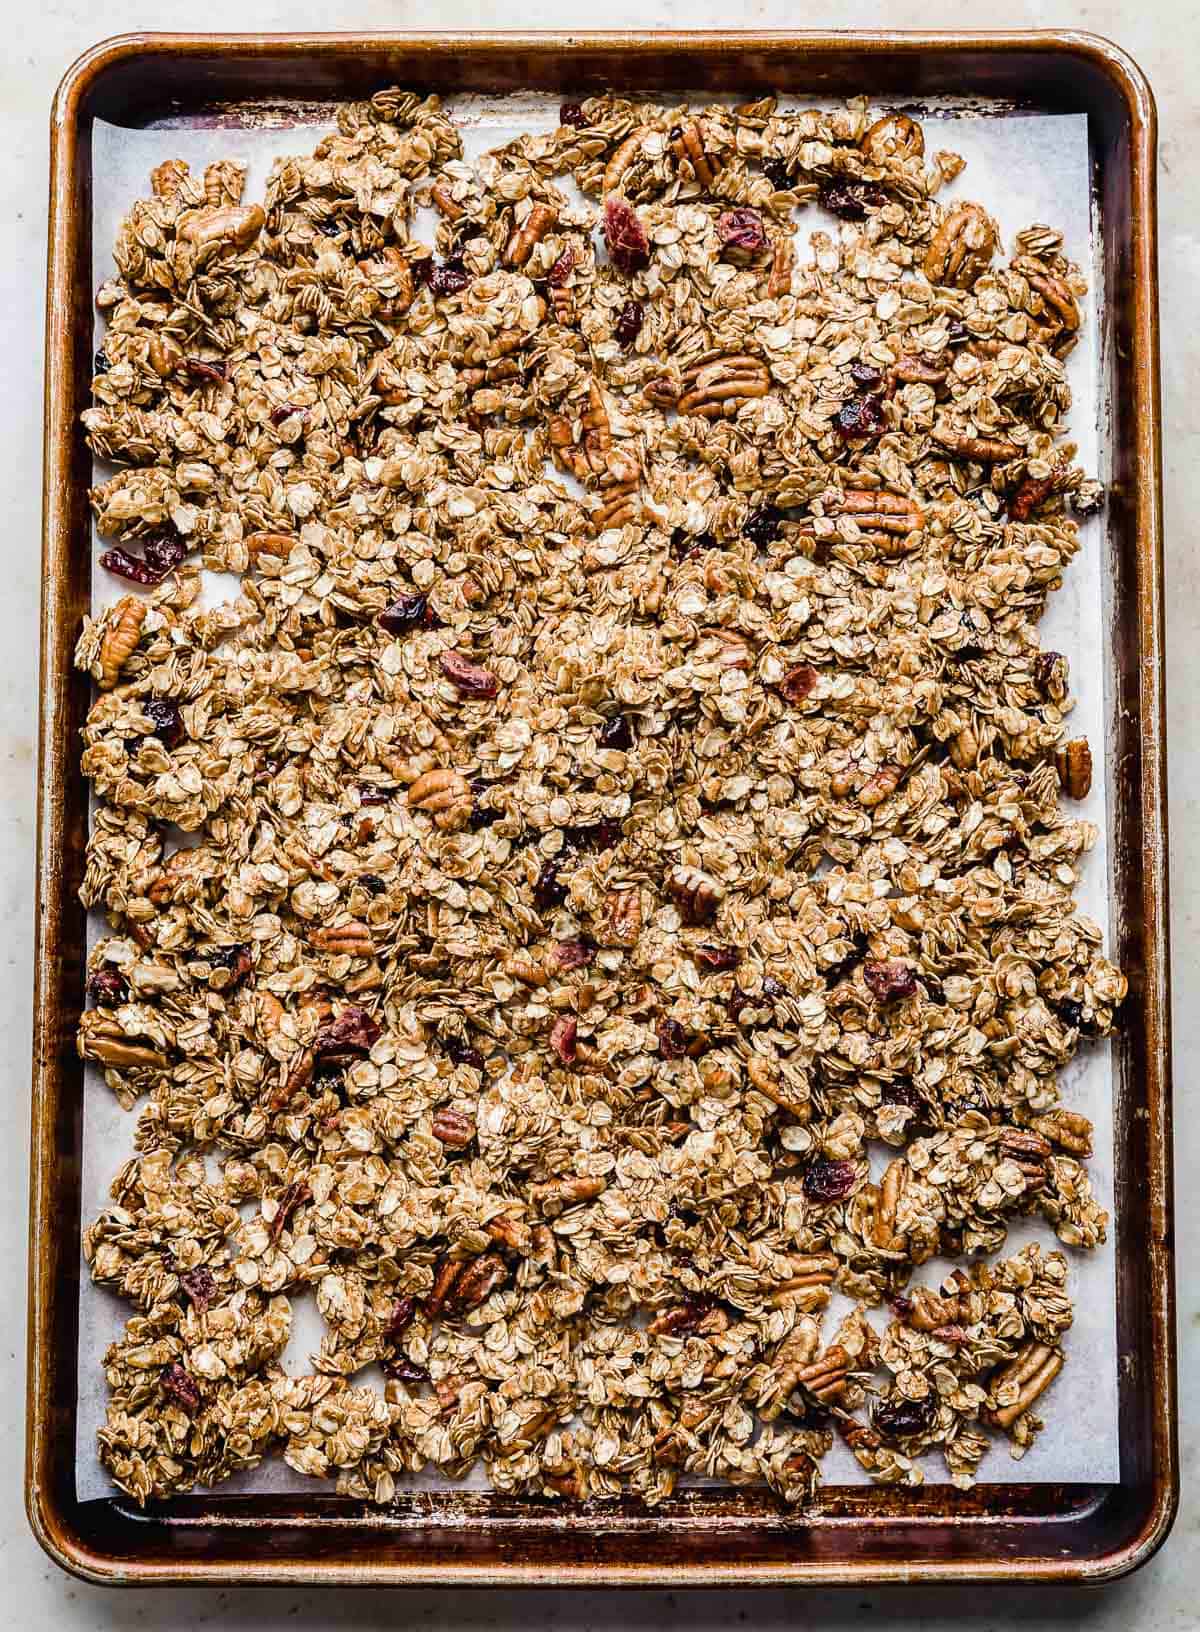 A baking sheet with Gingerbread Granola spread out on it.